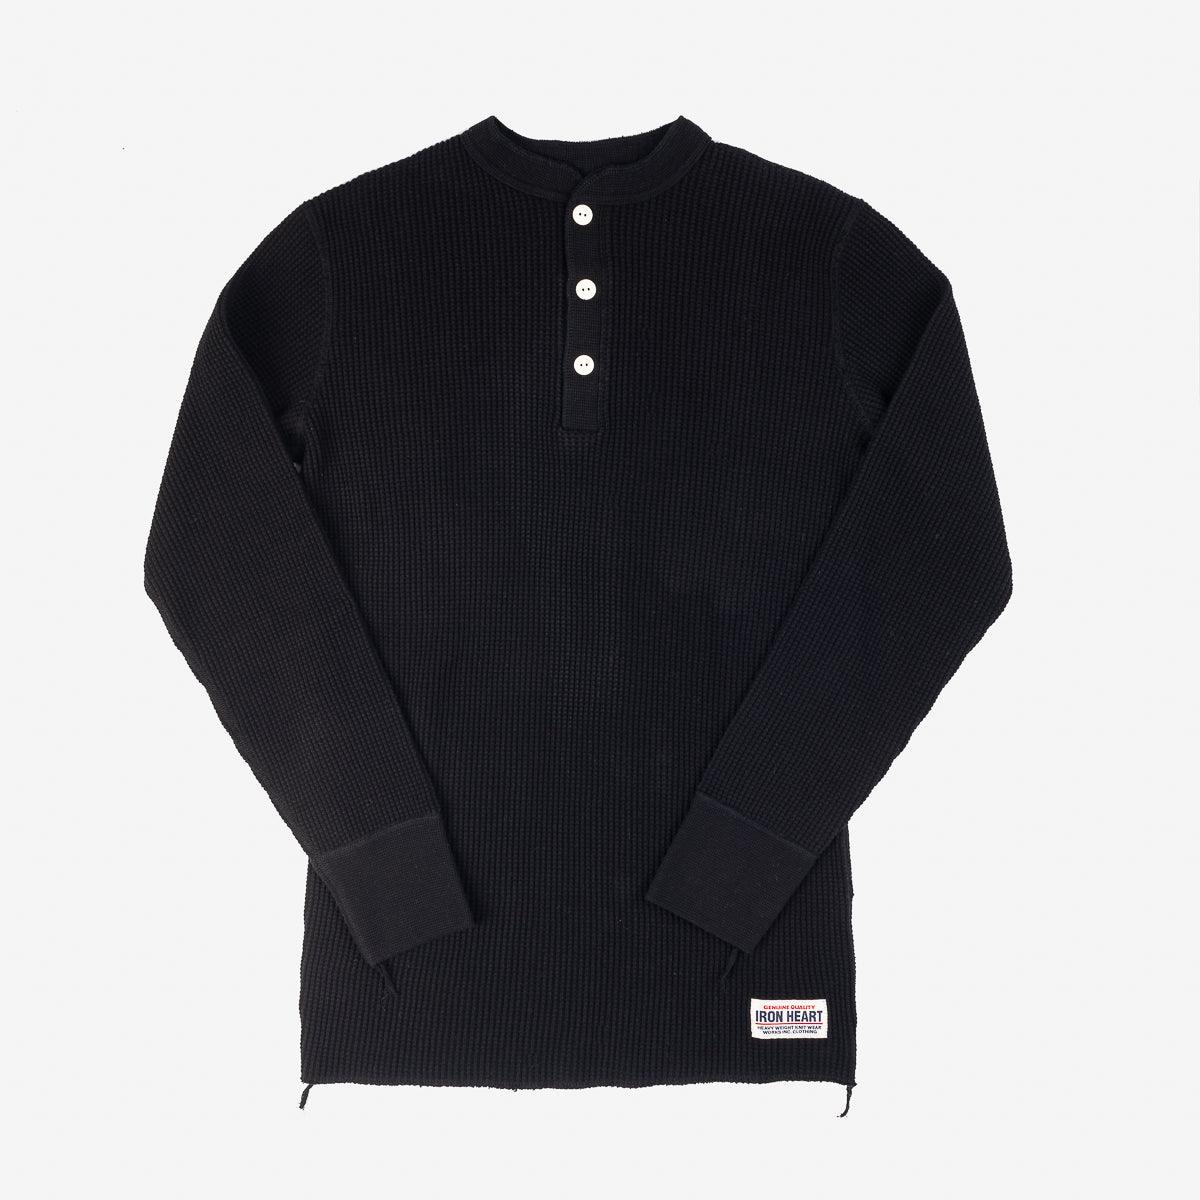 IHTL-1213-BLK - Waffle Knit Long Sleeved Thermal Henley Black